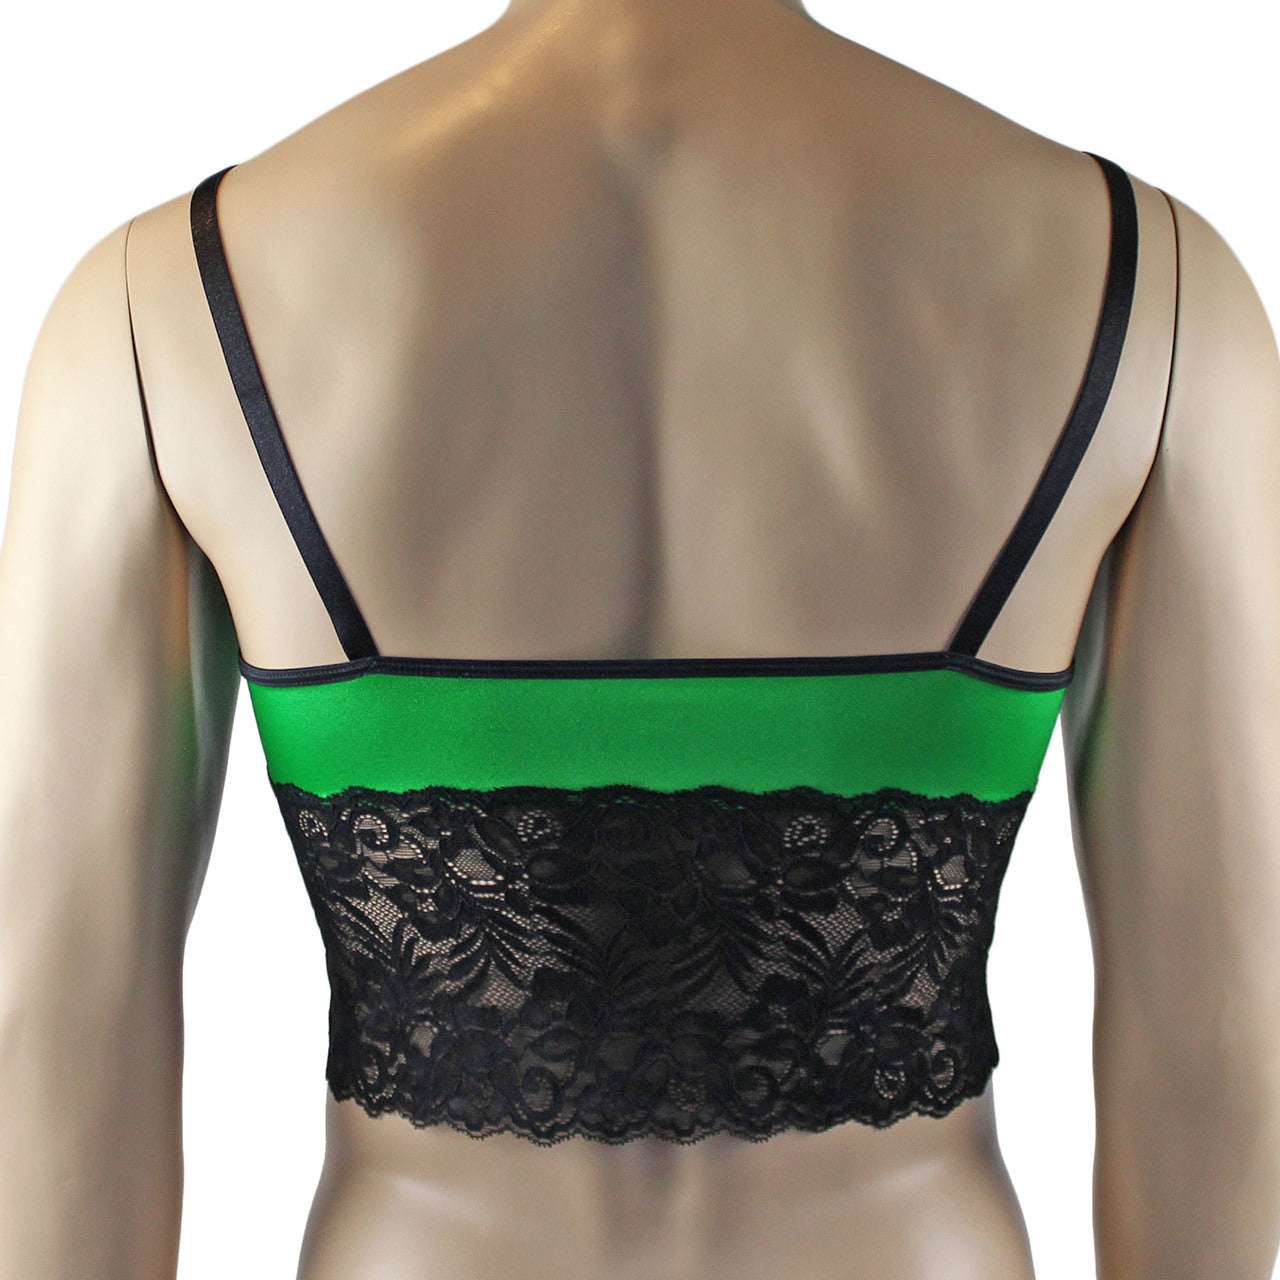 Mens Risque Camisole Bra Top with Wide Lace Trim Green and Black Lace